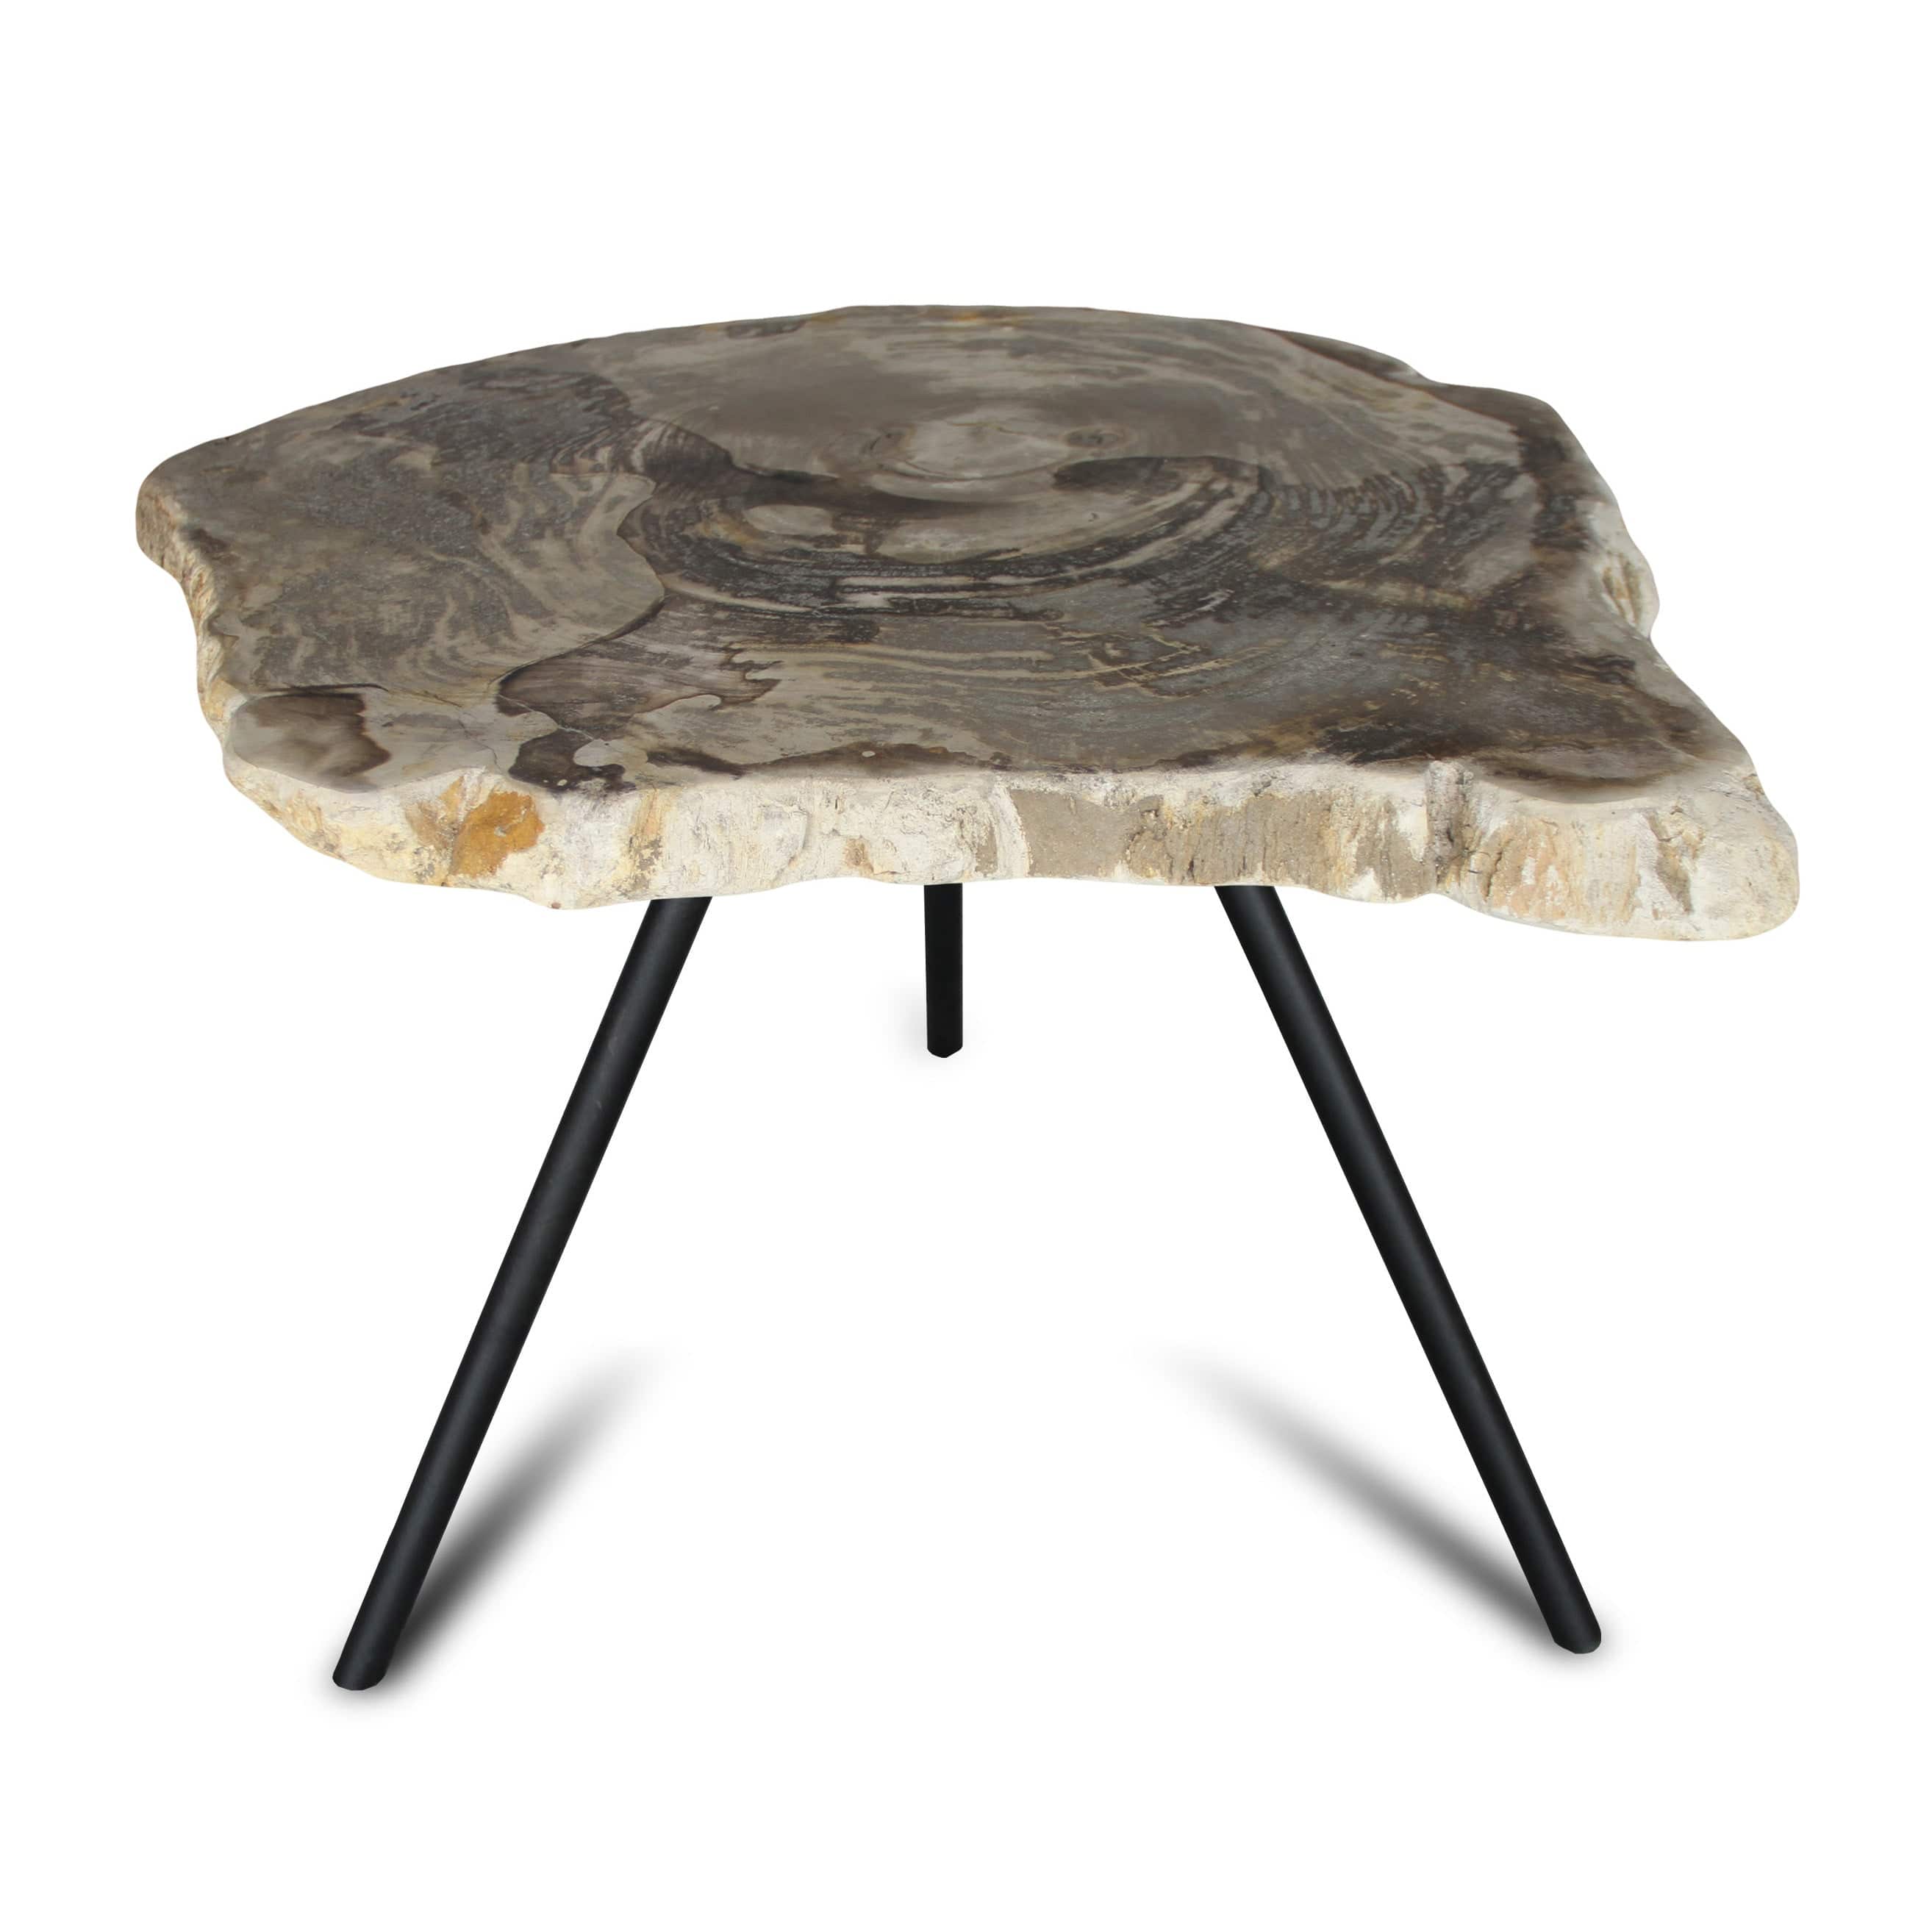 Kalifano Petrified Wood Petrified Wood Round Slice Side Table from Indonesia - 26" / 55 lbs PWT2000.005